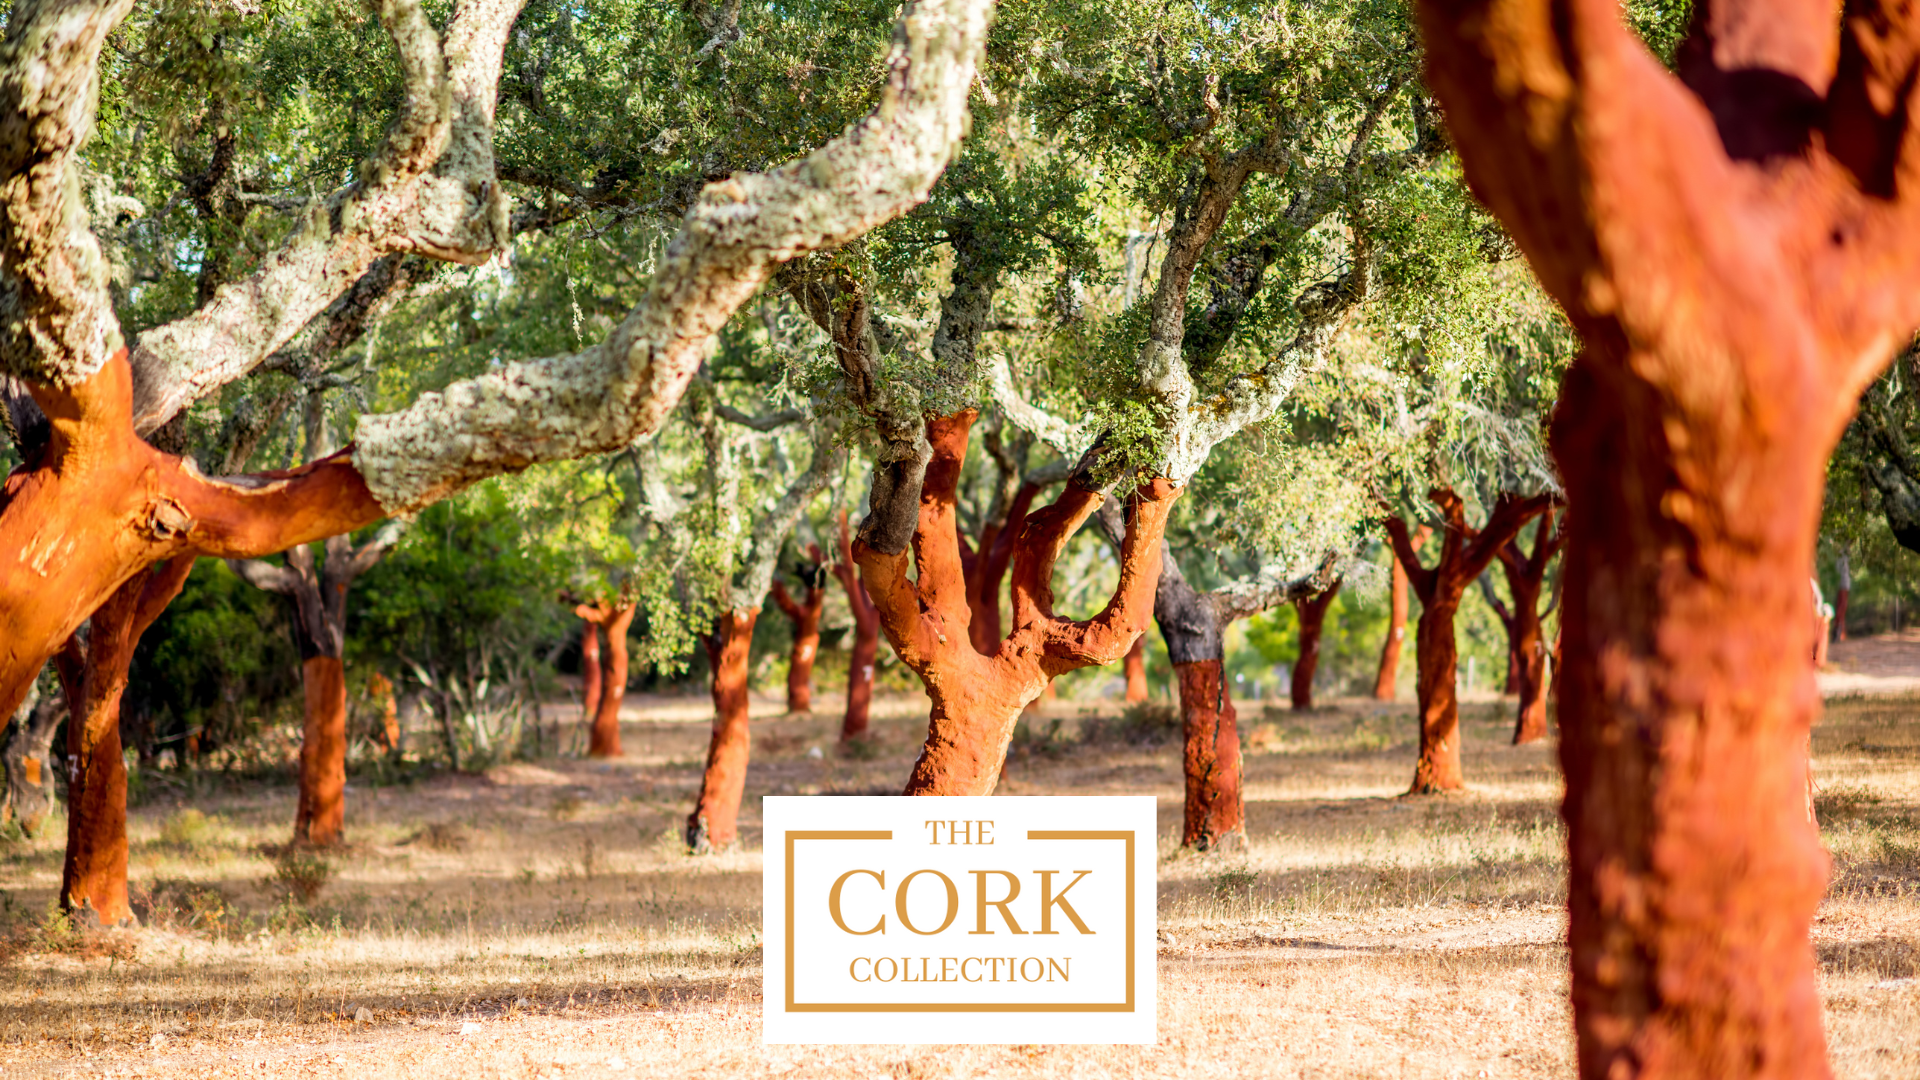 Video laden: The Cork Collection